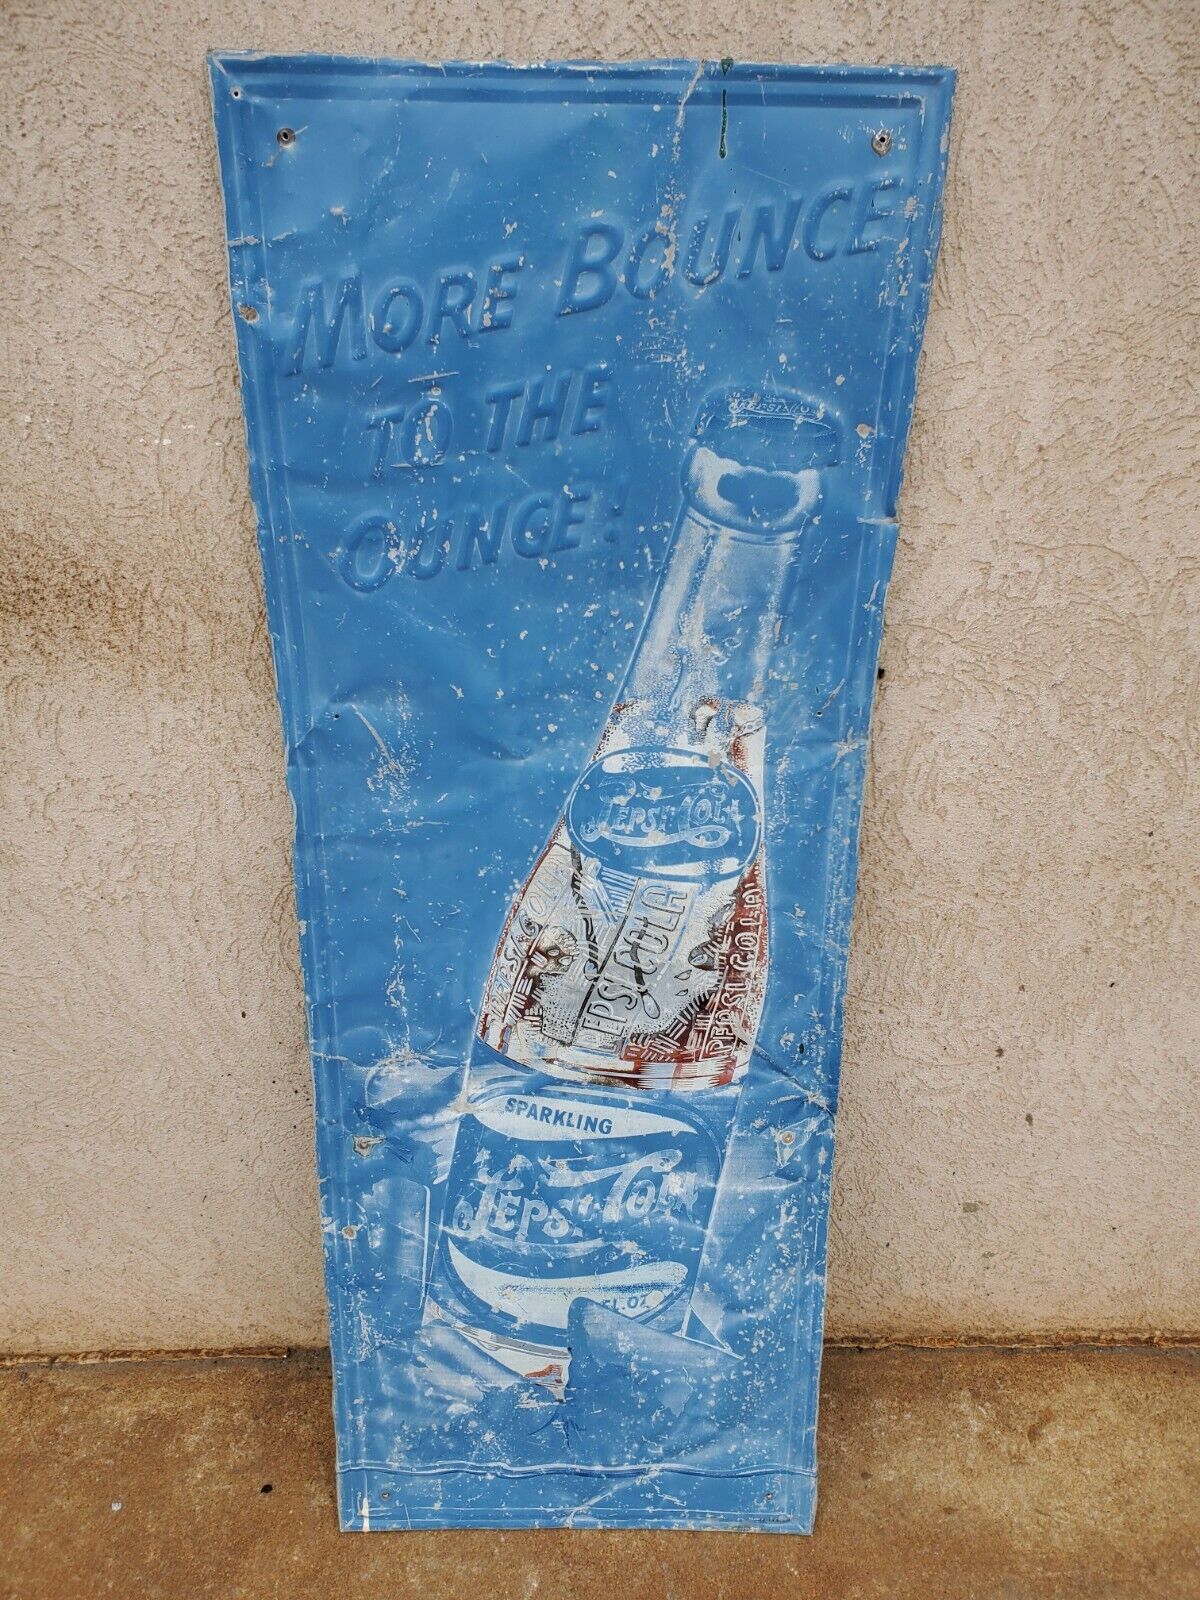 RARE1940s Sparkling Pepsi Cola More Bounce to the Ounce Metal Sign Soda Bottle